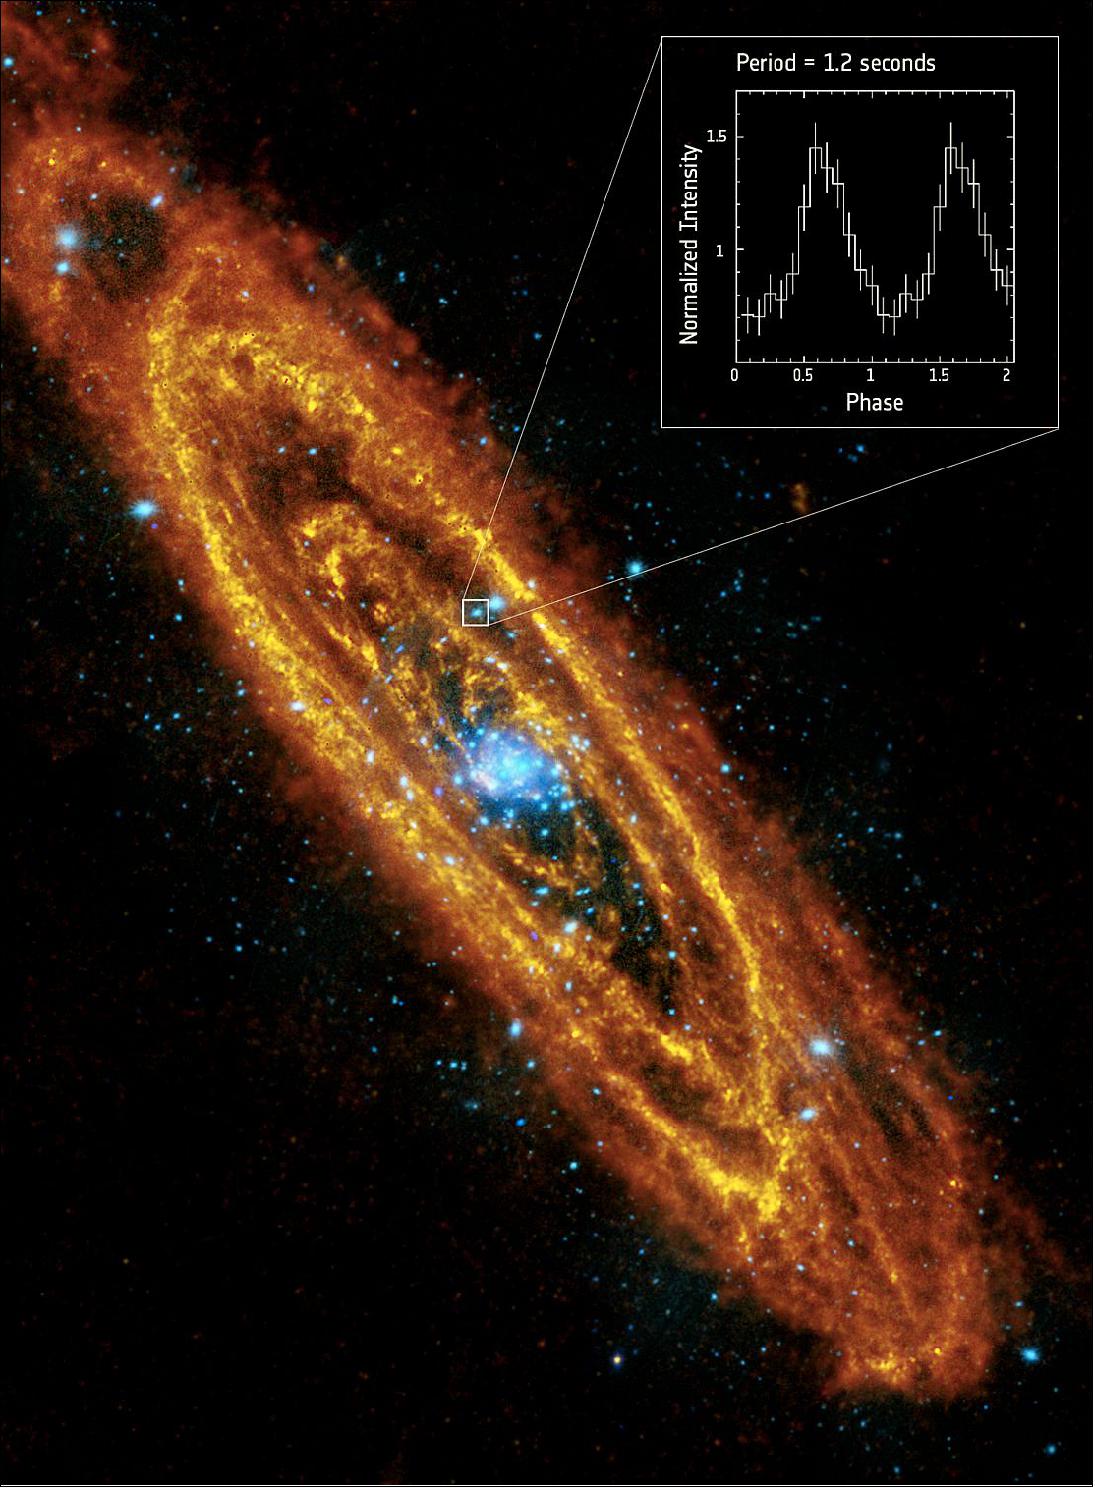 Figure 109: Andromeda, or M31, is a spiral galaxy similar to our own Milky Way. For the first time, a spinning neutron star has been inferred in XMM-Newton data [image credit: Andromeda: ESA/Herschel/PACS/SPIRE, J. Fritz, U. Gent, XMM-Newton/EPIC, W. Pietsch, MPE; data: P. Esposito et al., (2016)]